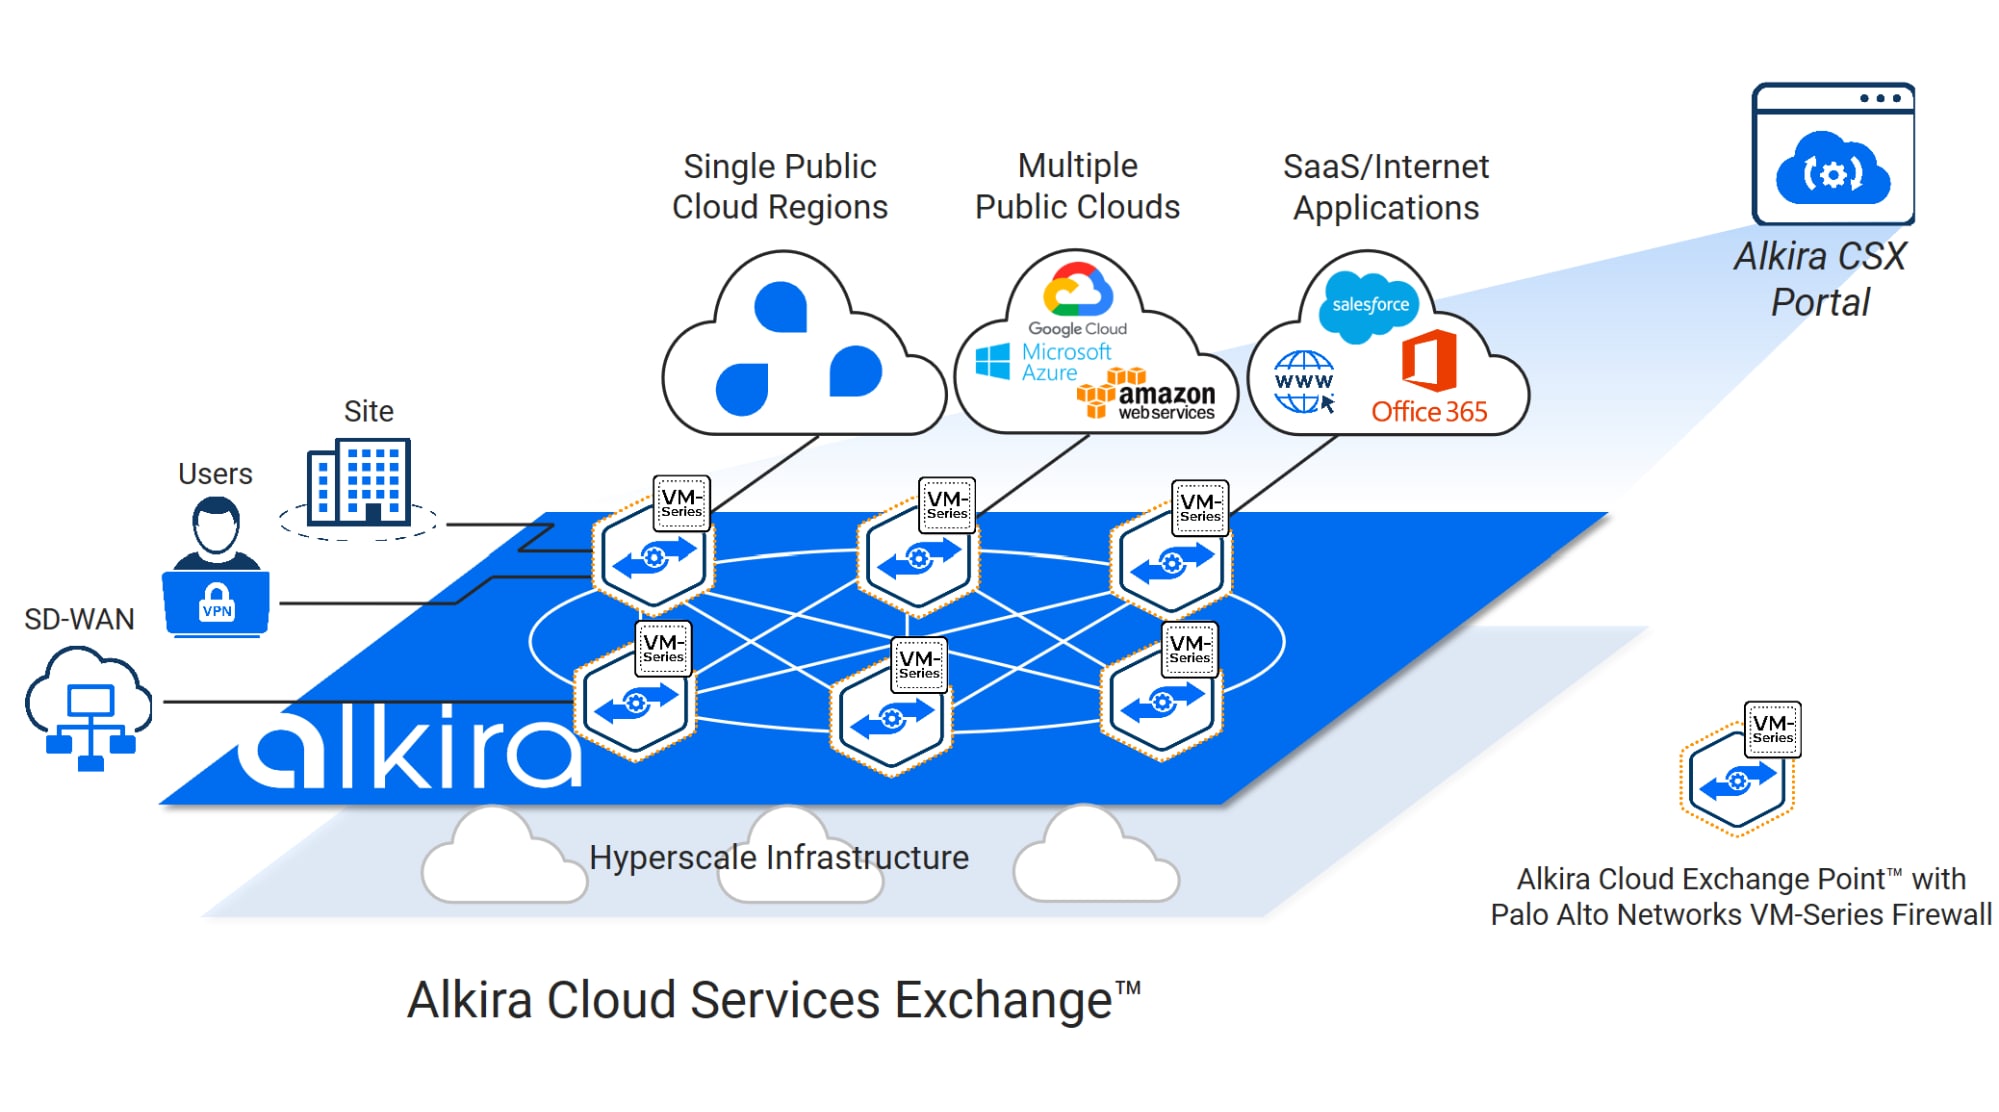 This image shows how Alkira Cloud Exhange Point integrates with Palo Alto Networks VM-Series virtual firewalls for better multi-cloud networking. 